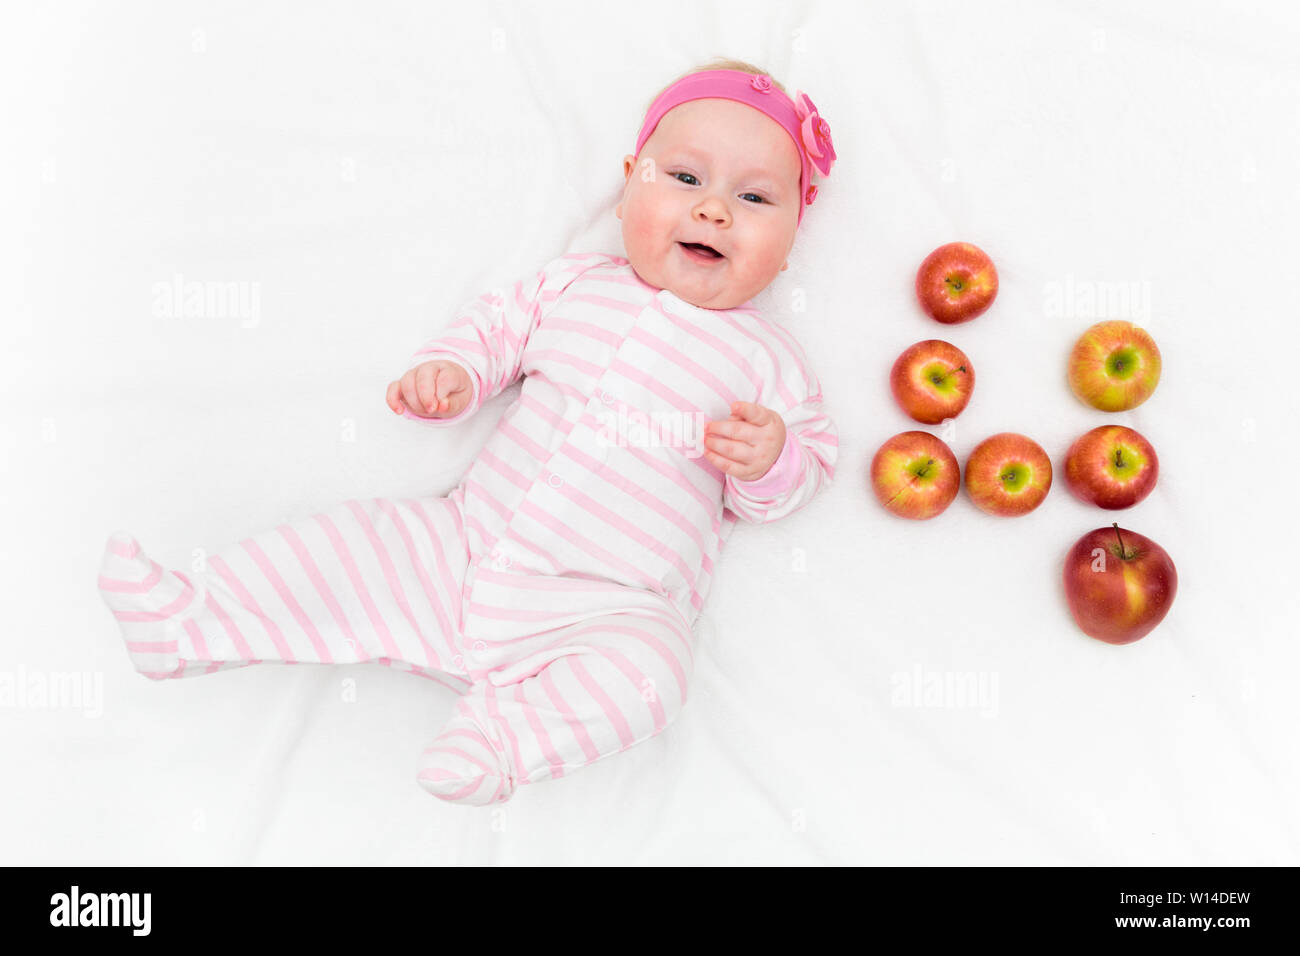 Cute little baby girl laying on white background with fresh red-green apples in shape of number four Stock Photo